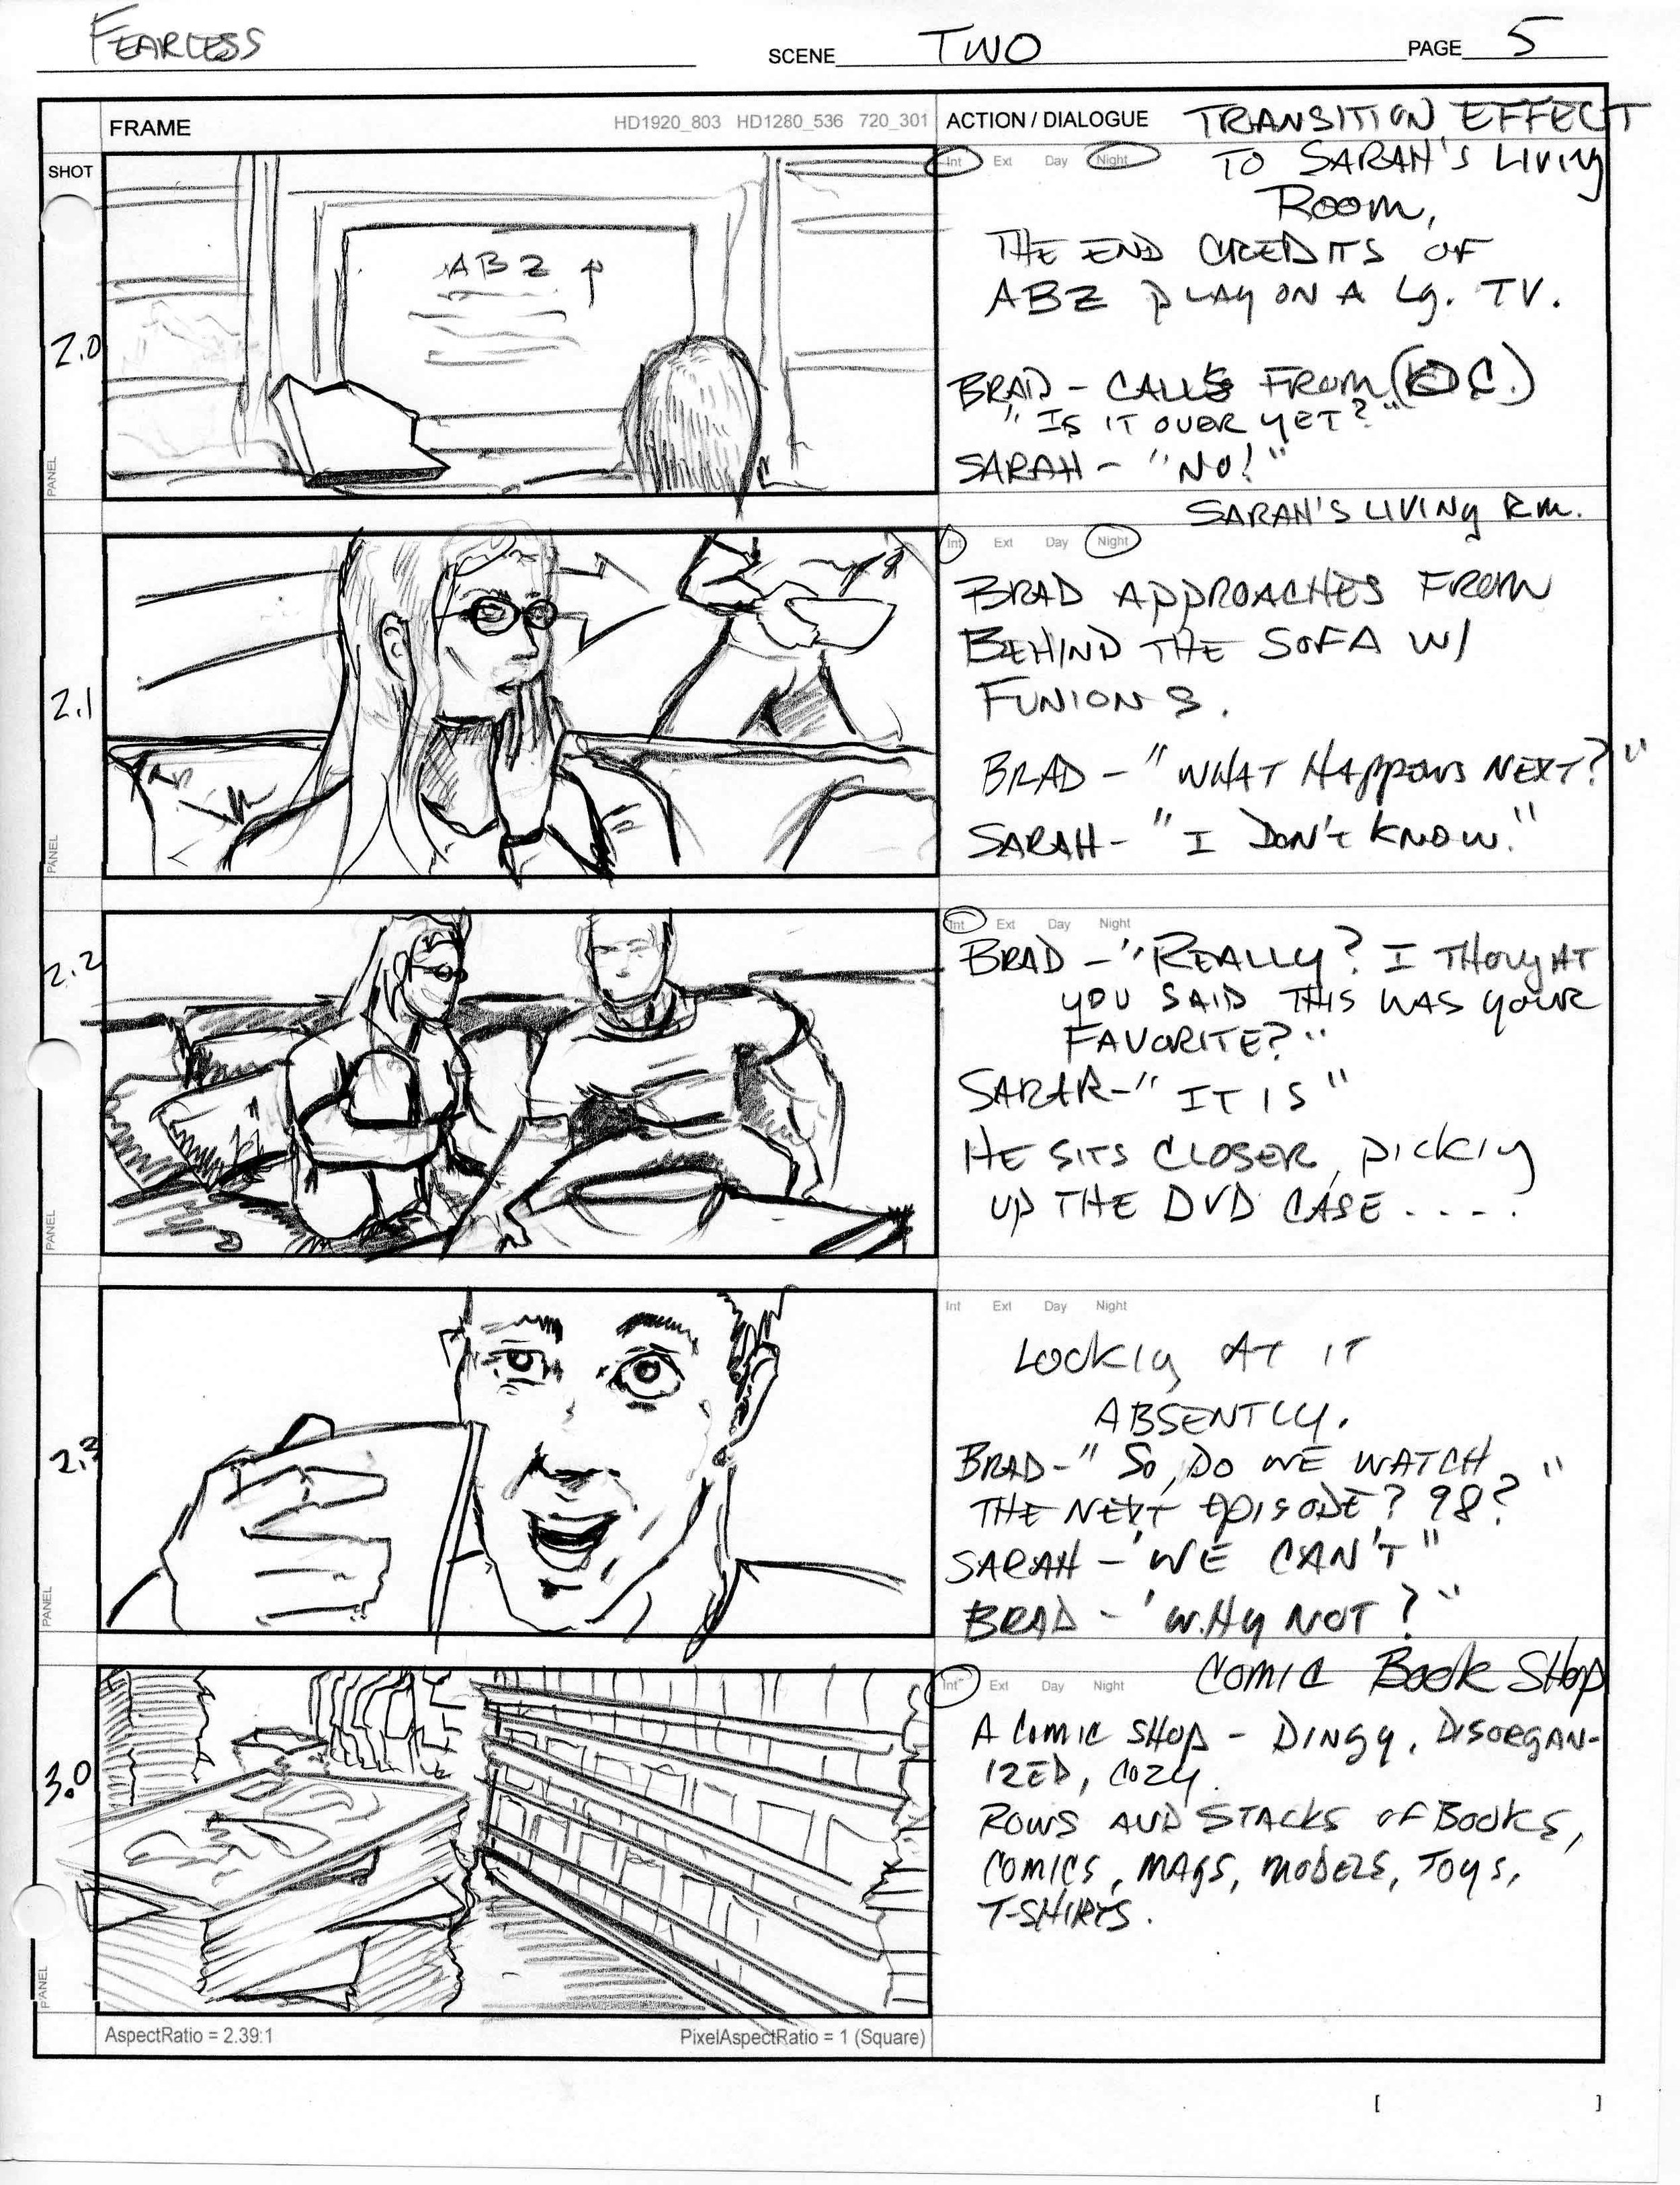 Fearless Episode Hunters - Storyboard sample A